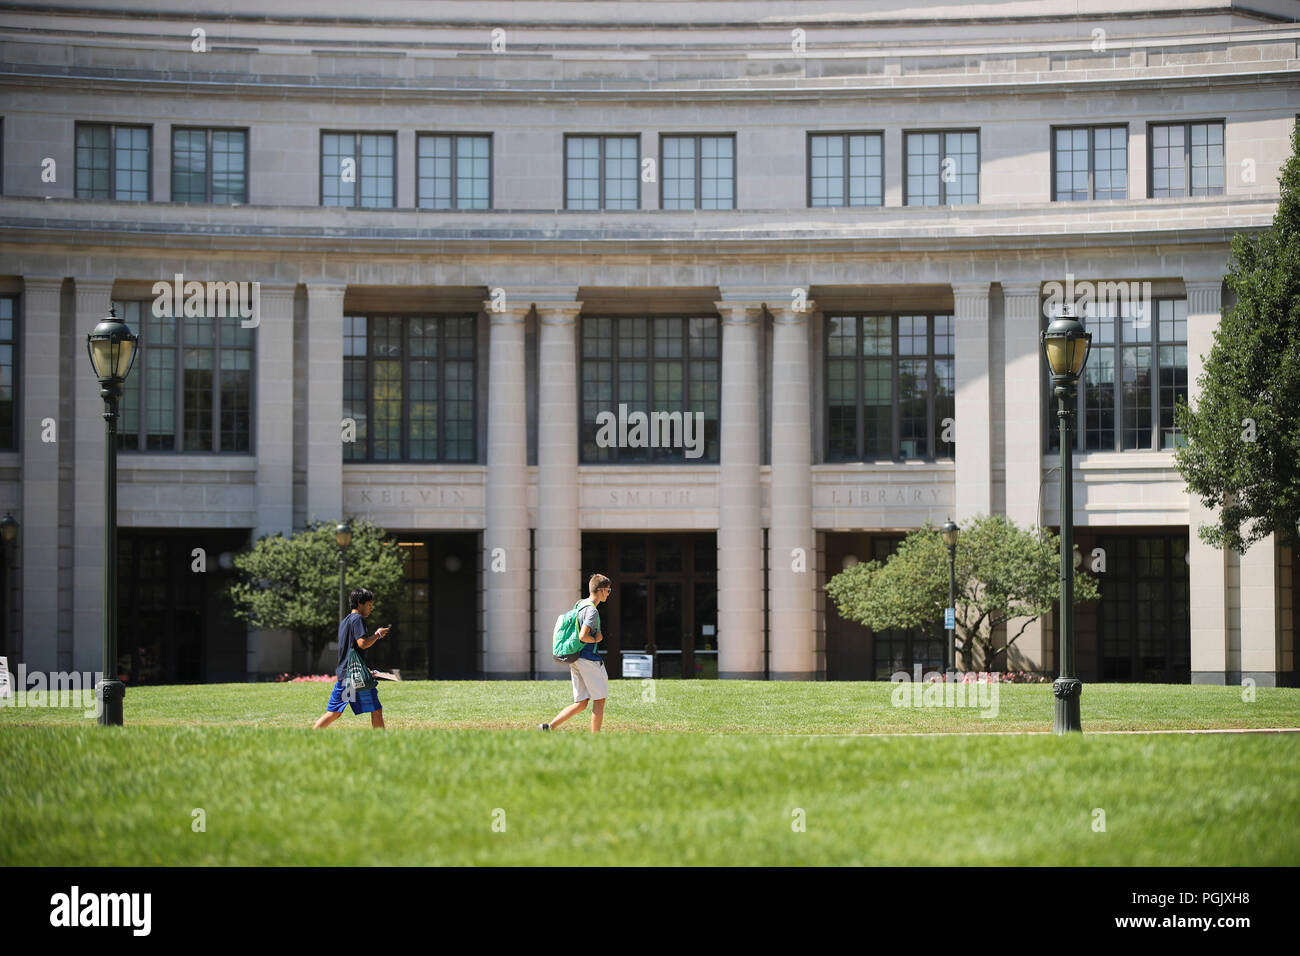 Ohio, USA. 23rd Aug, 2018. Students walk past the Kelvin Smith Library at Case Western Reserve University (CWRU) in Cleveland, Ohio, the United States, Aug. 23, 2018. It might not be as famous as the Ivy League schools, CWRU, located in Cleveland, the U.S. midwestern state of Ohio, is among the top American universities that Chinese students choose to study in. TO GO WITH Feature: Midwest U.S. university aspires to attract more Chinese students Credit: Wang Ying/Xinhua/Alamy Live News Stock Photo